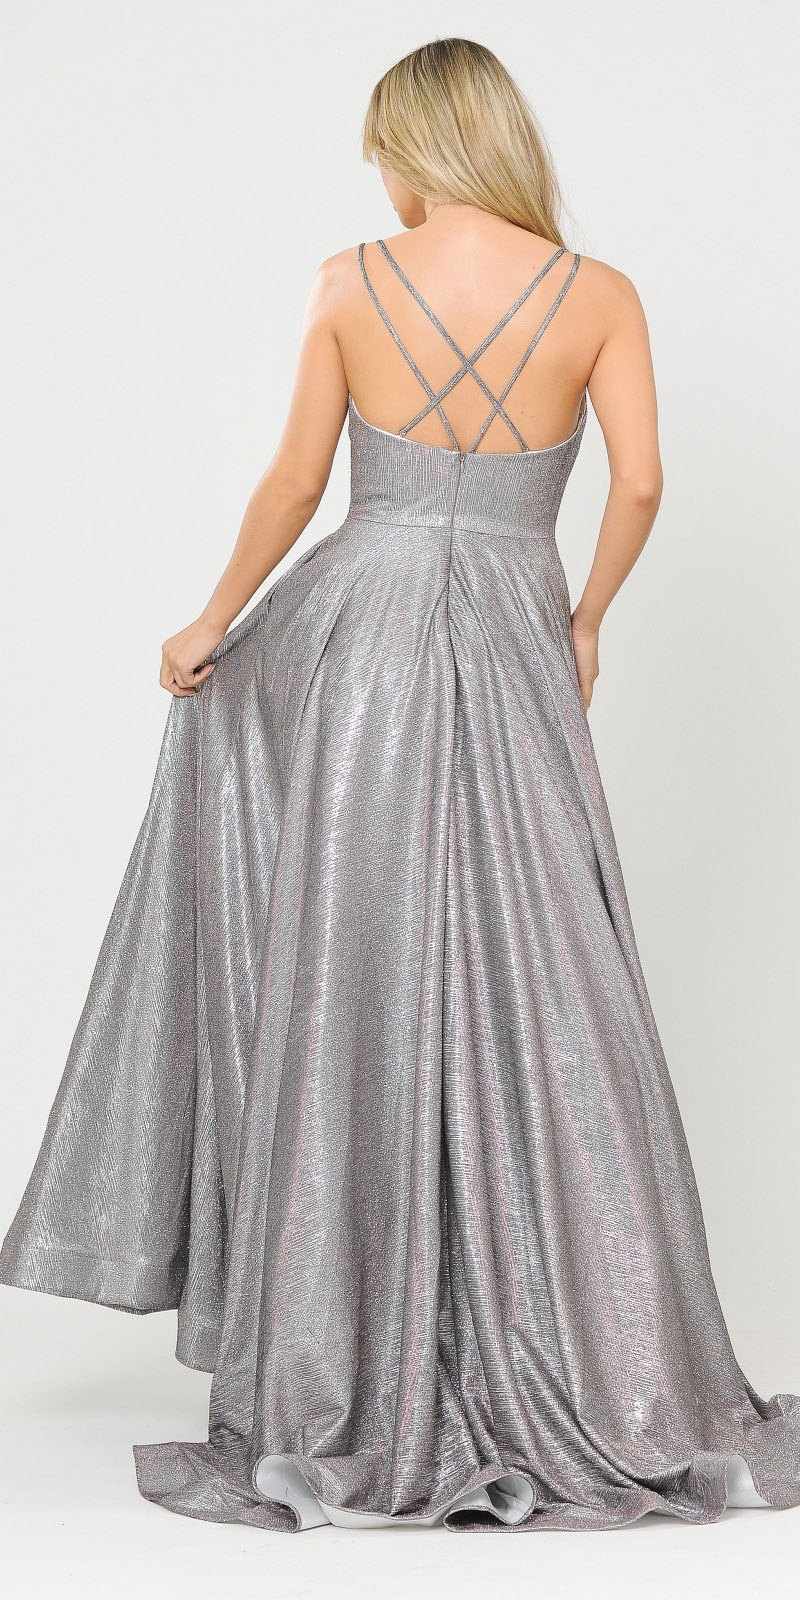 Magenta/Silver Long Prom Dress with Criss-Cross Back 